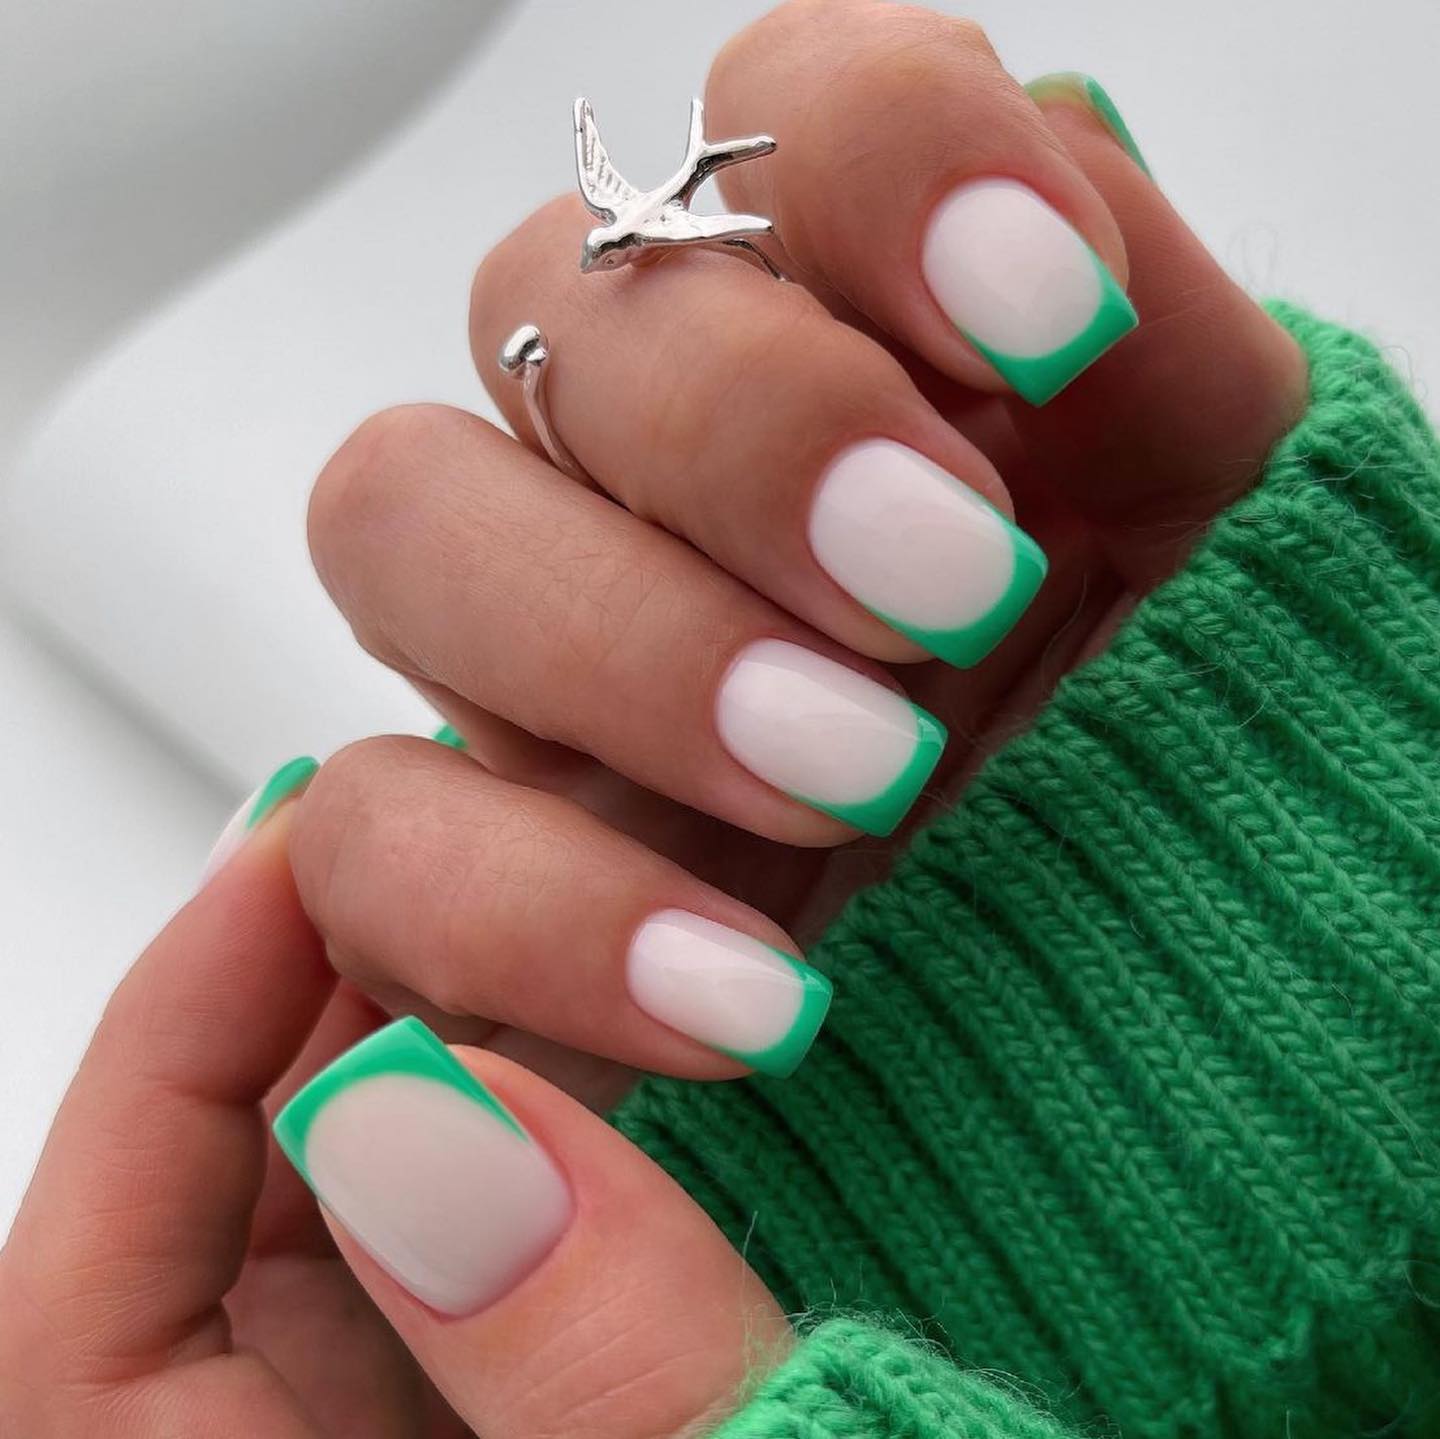 Short White Nails with Green Tips